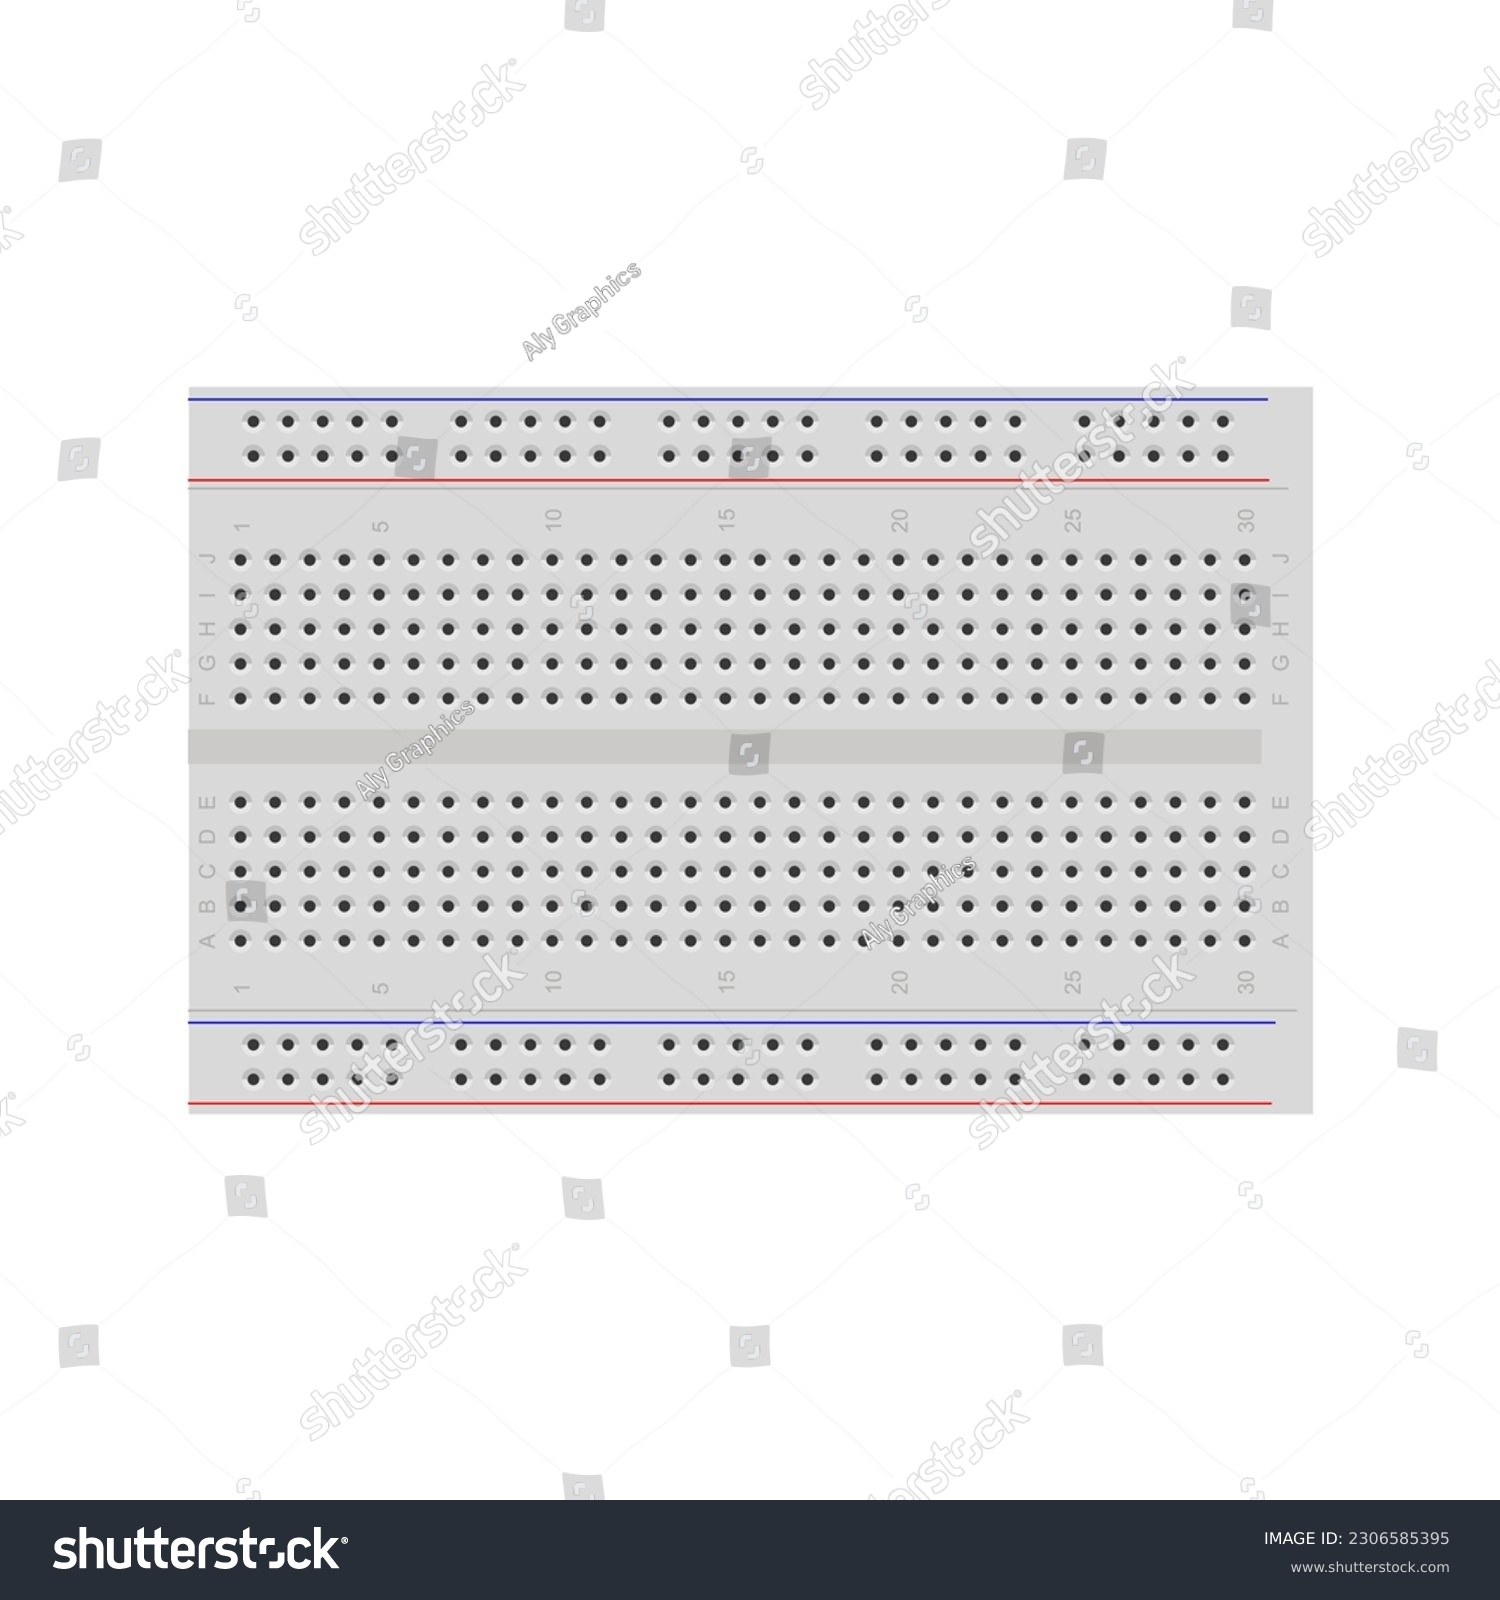 SVG of Half breadboard vector illustration, providing graphic designers with a visual representation of a half-sized breadboard commonly used for prototyping and experimenting with electronic circuits svg